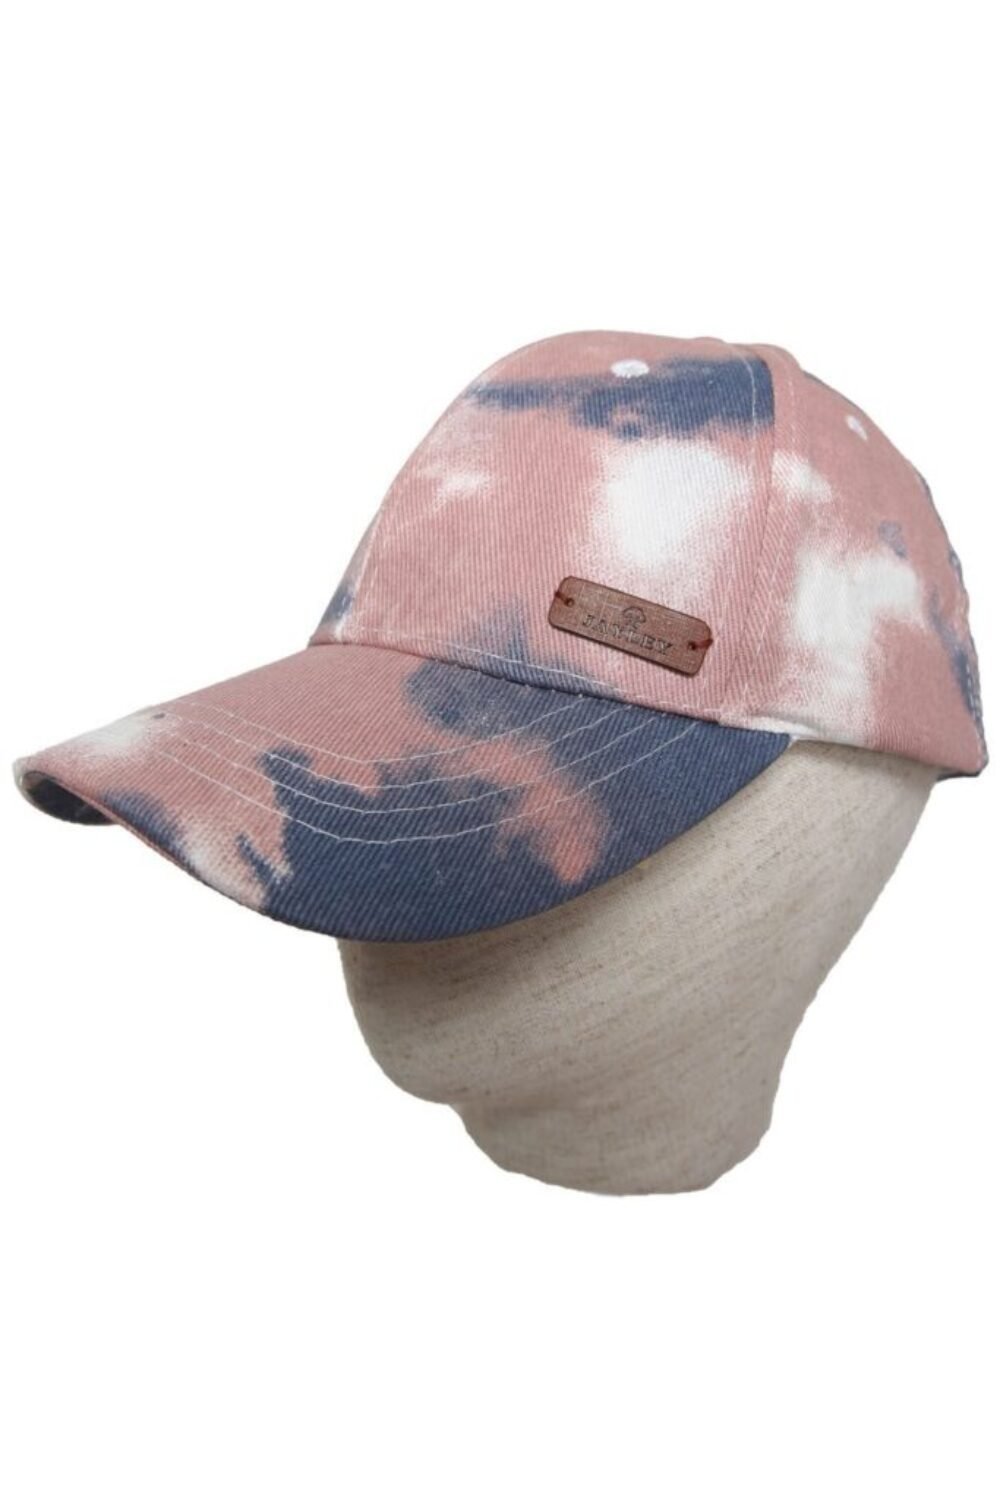 Shop Lux Tie Dye Baseball Cap and women's luxury and designer clothes at www.lux-apparel.co.uk